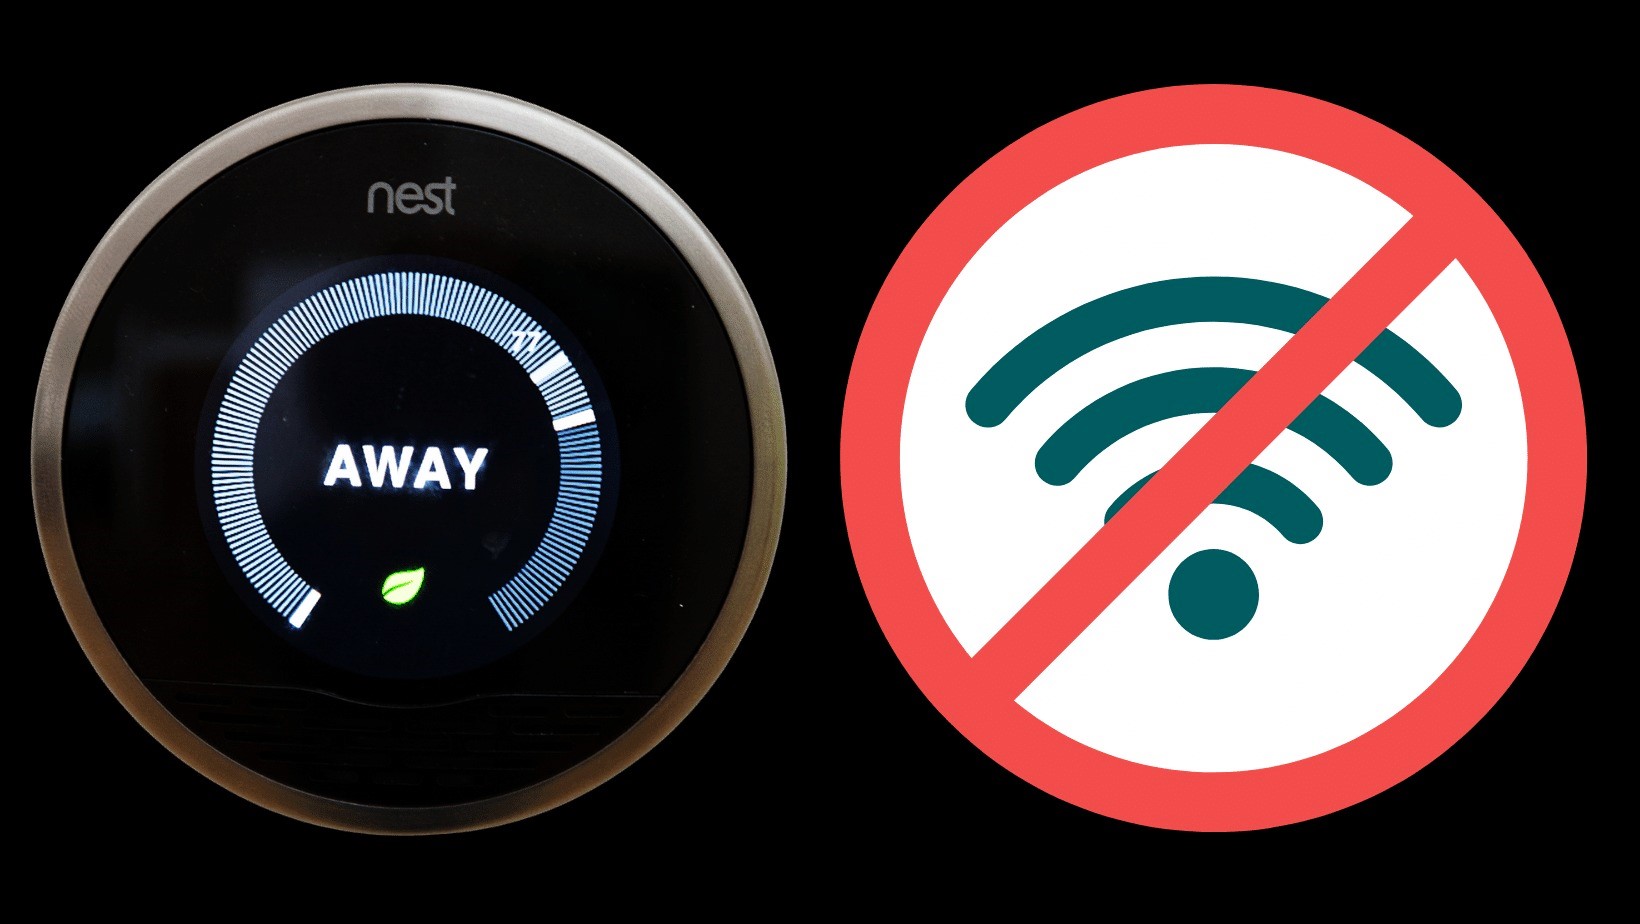 How To Use A Nest Thermostat Without WiFi